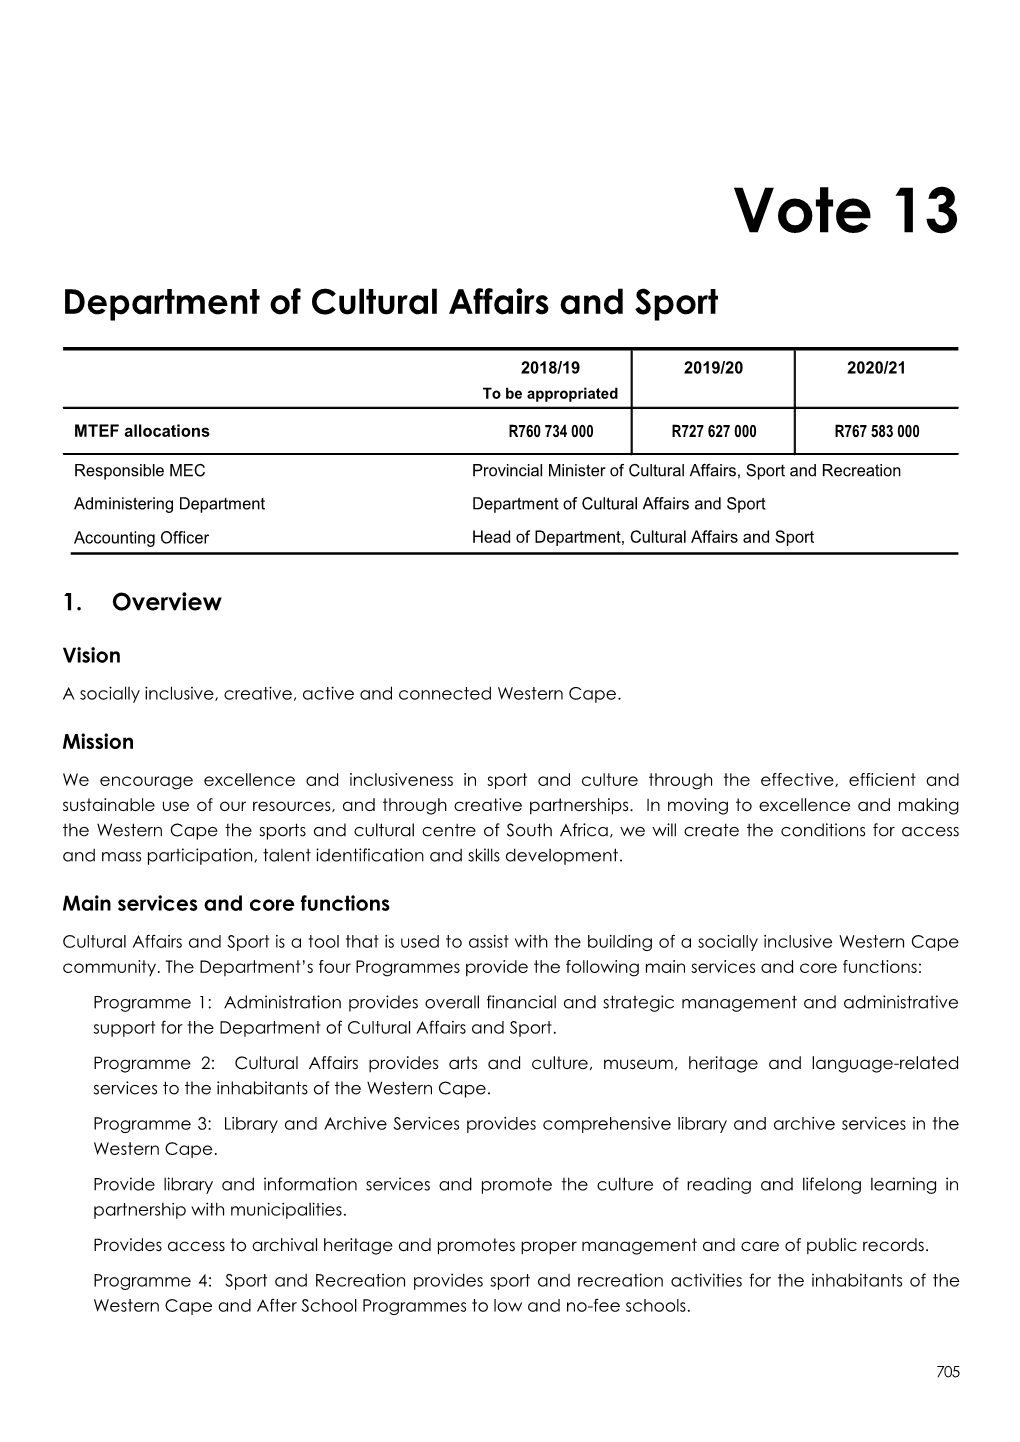 Vote 13 : Cultural Affairs and Sport